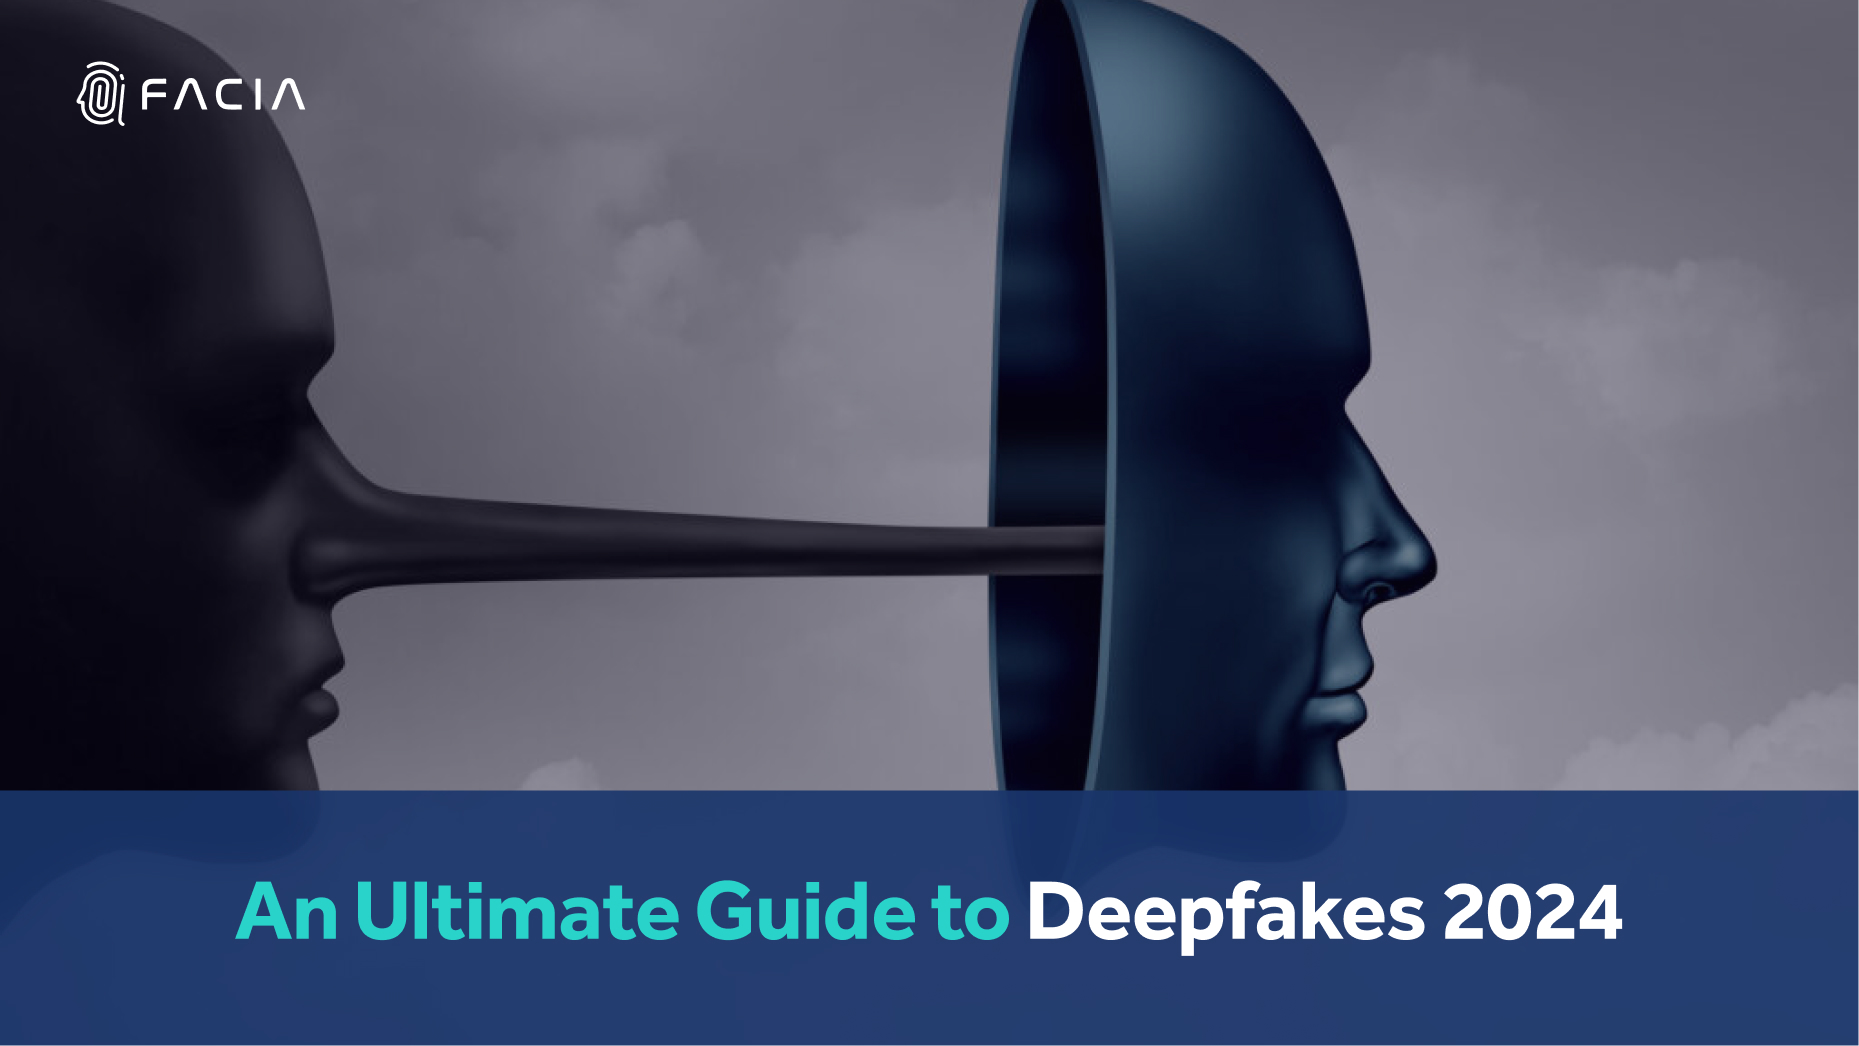 An Ultimate Guide to Deepfakes 2024